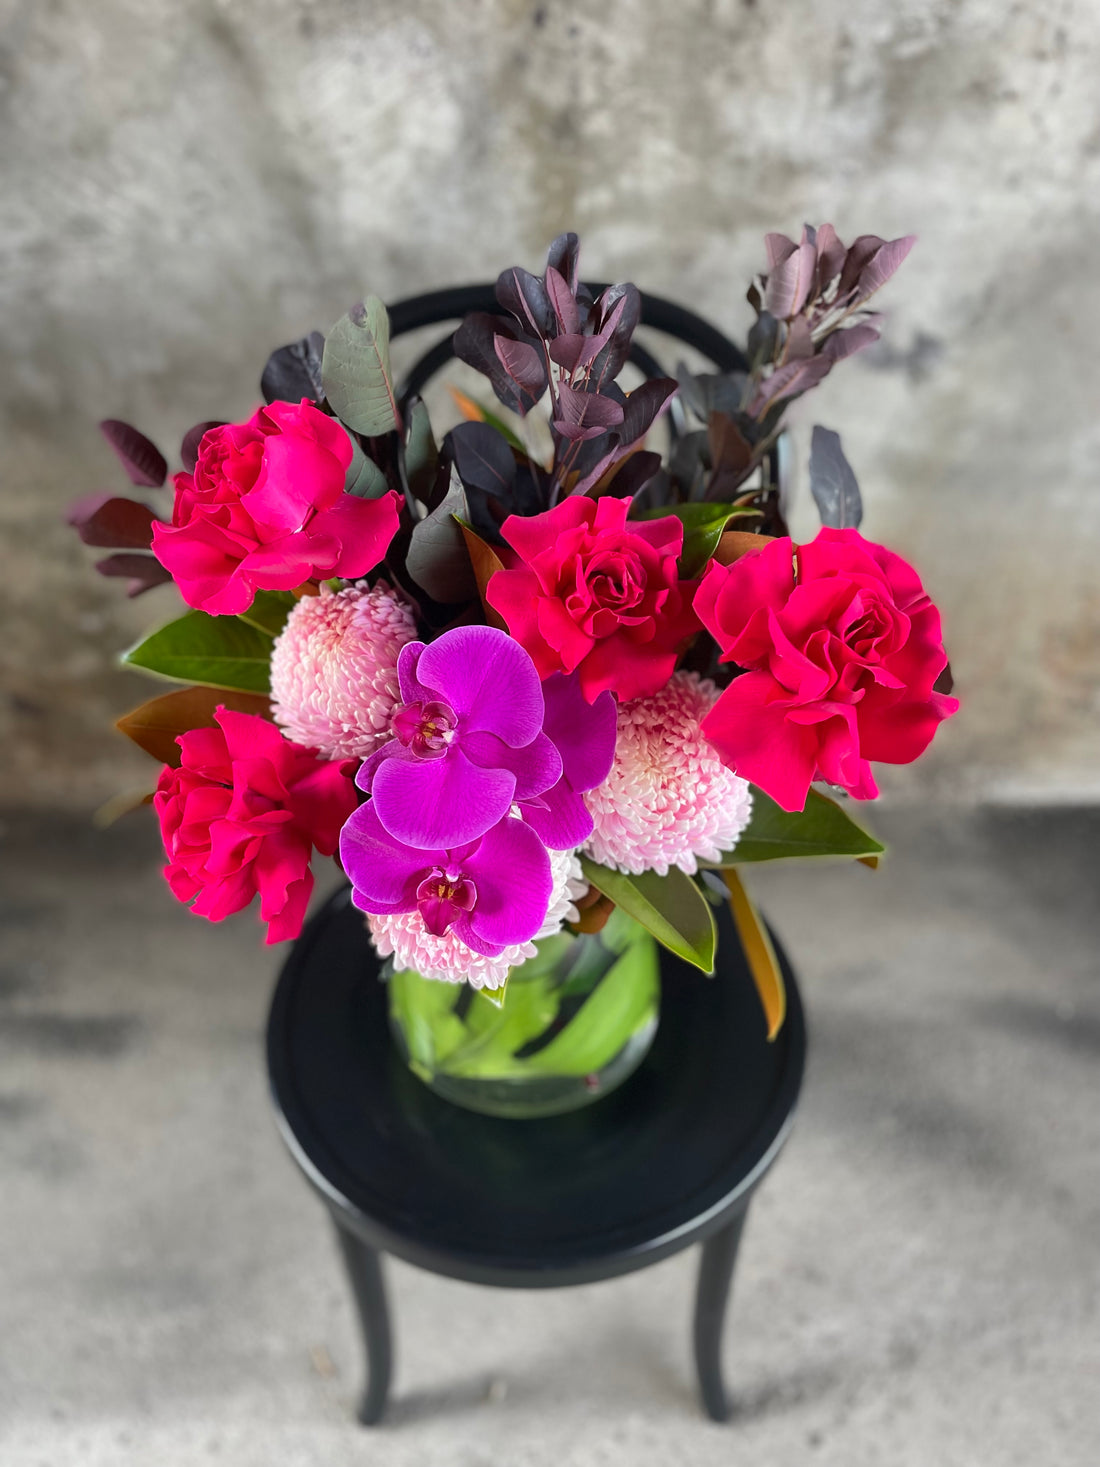 Close up image of Hot pink, blush, magenta flowers and seasonal foliage displayed in a leaf lined tapered vase, sitting on a black bentwood chair with a concrete wall background.